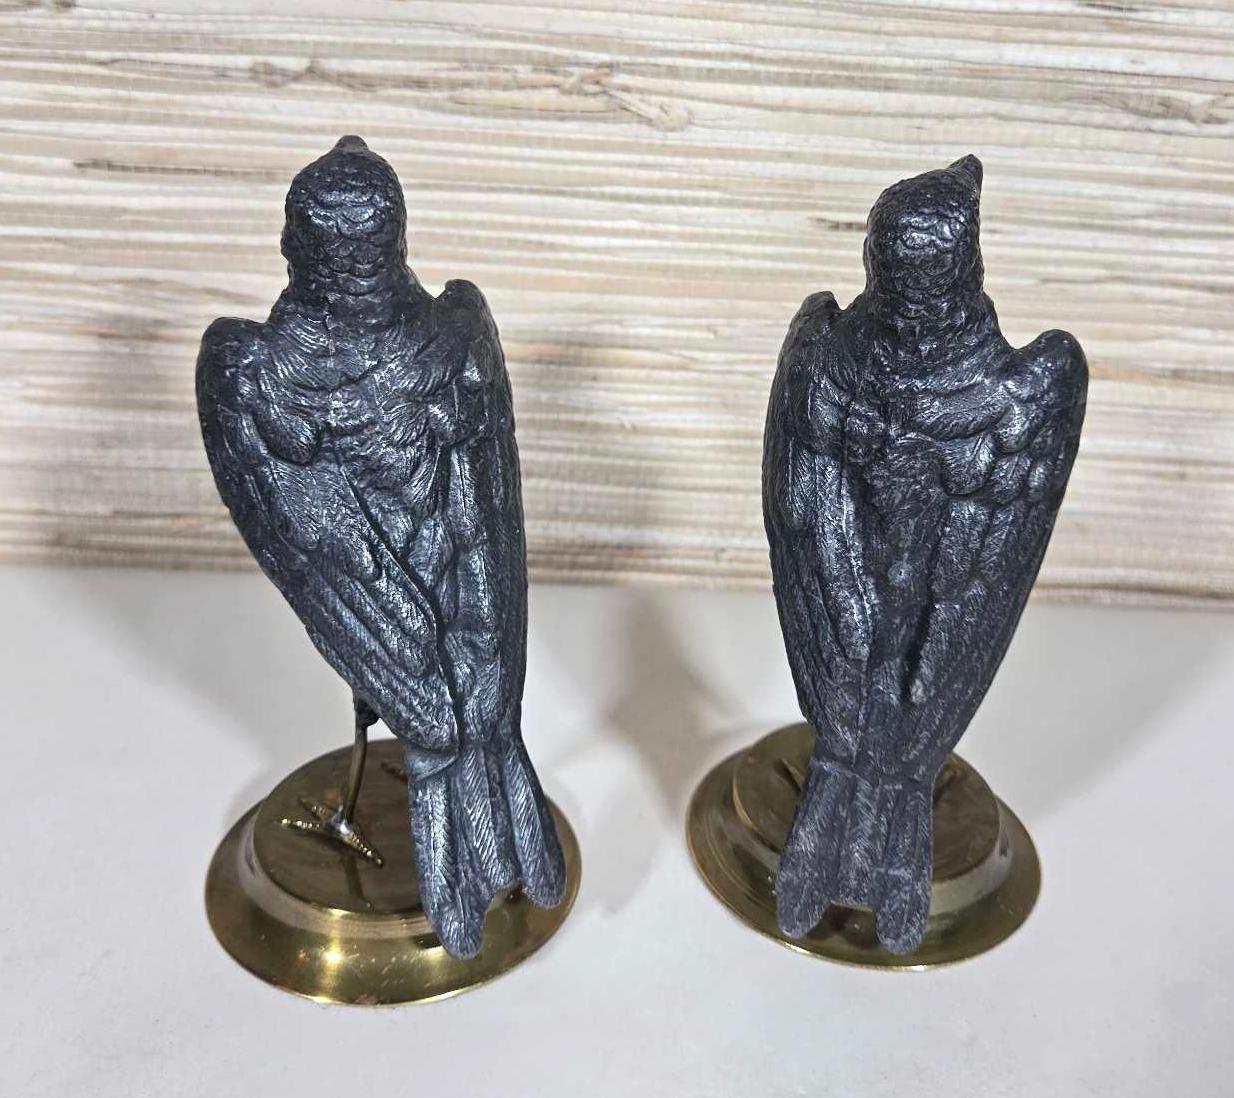 Estate Collection of Vintage Metal Ware Incl. Bookends, Bird Statues, & More